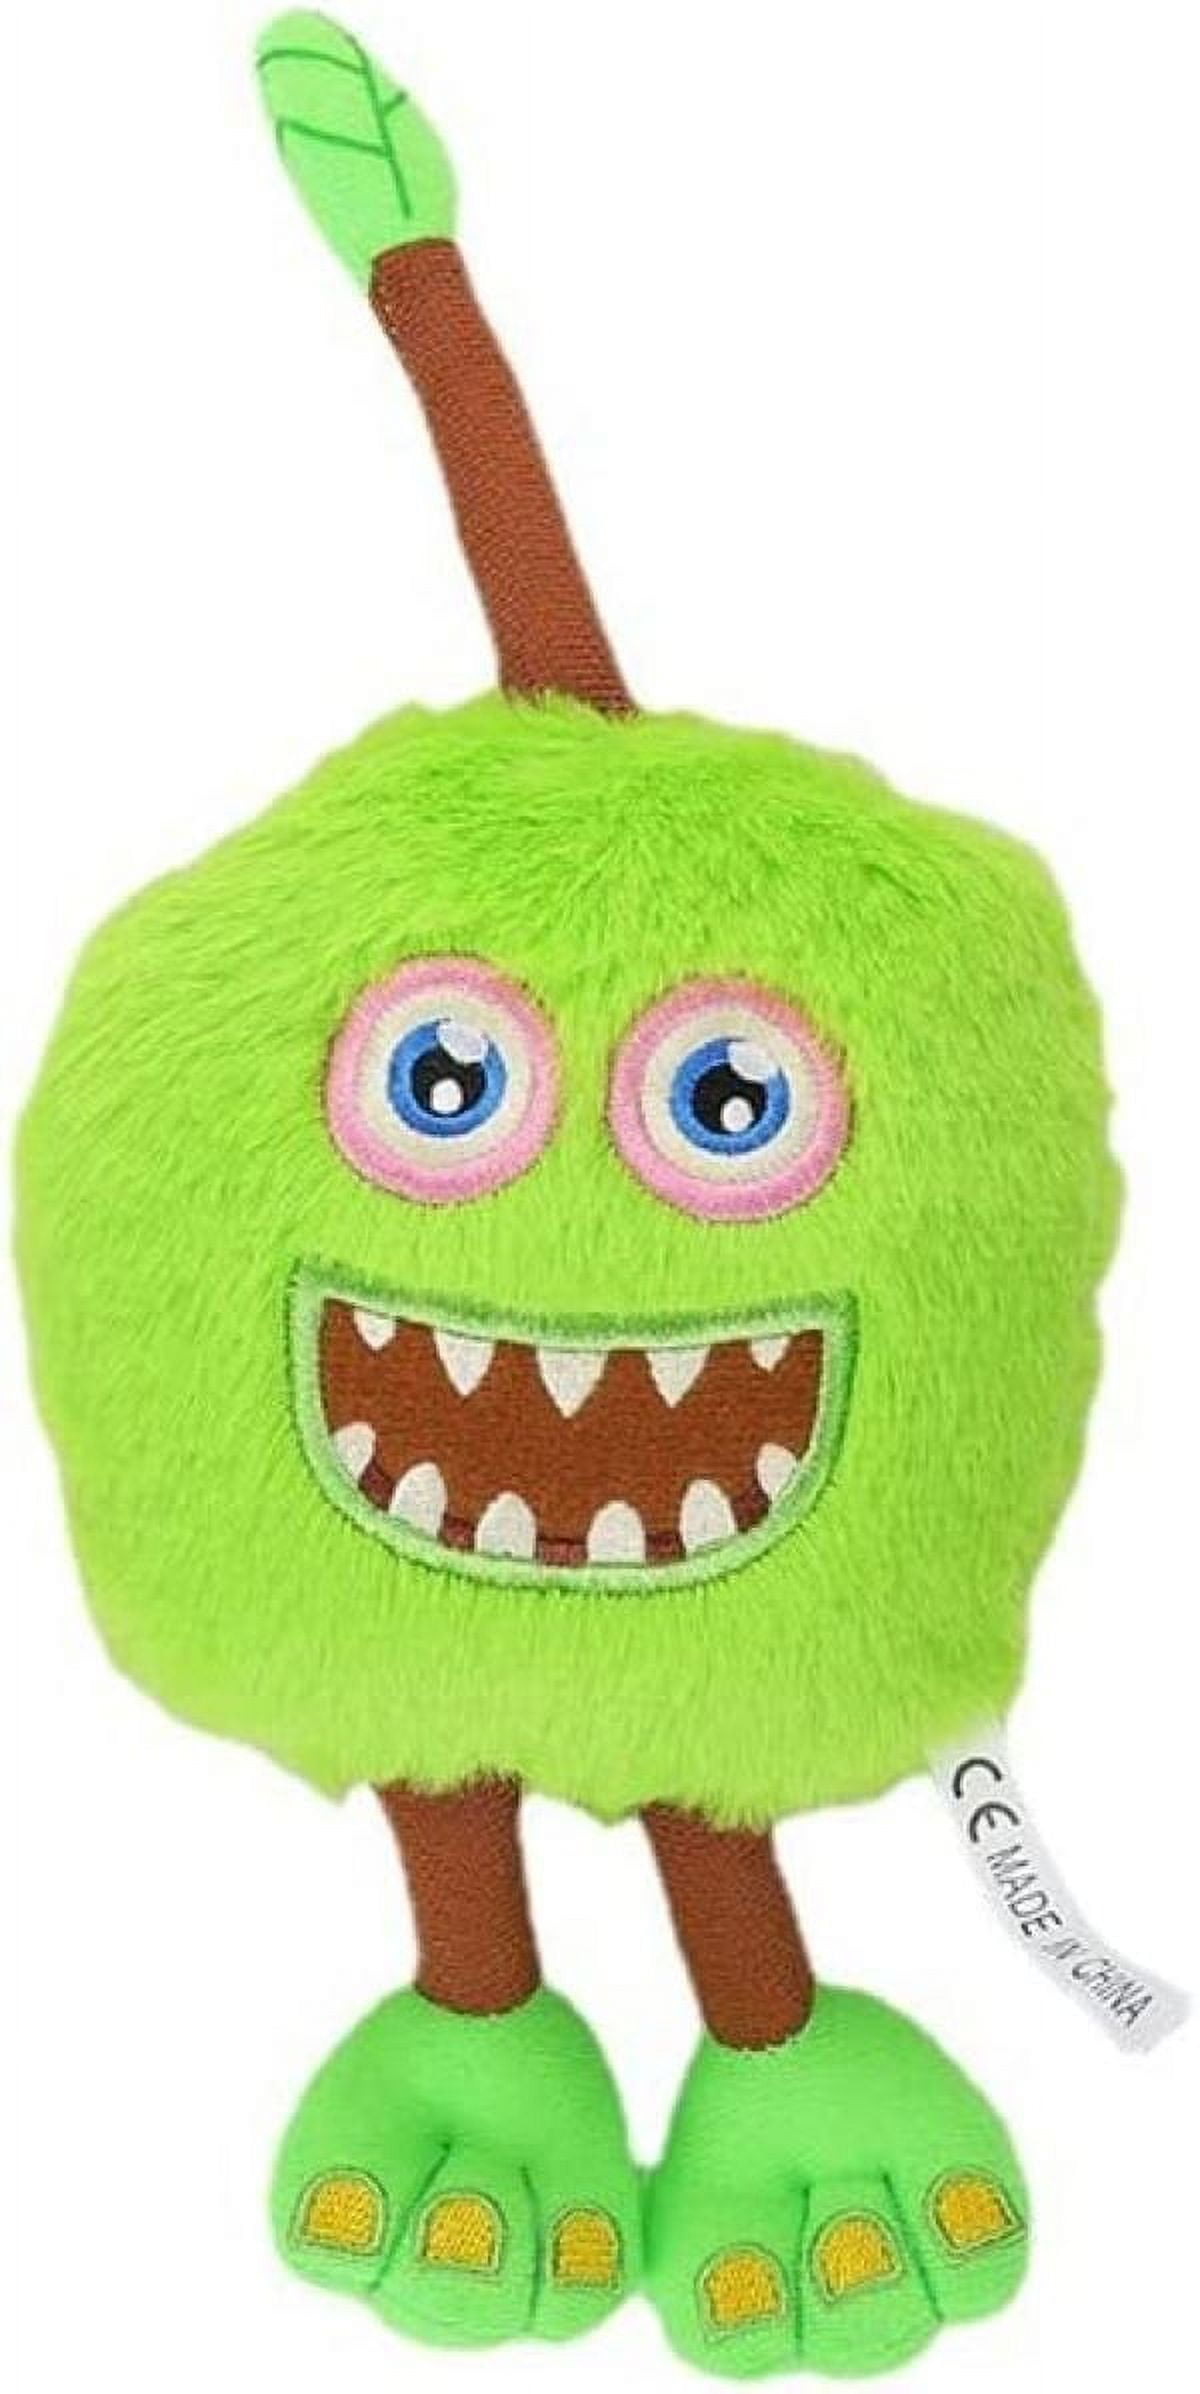 11'' Wubbox My Singing Monsters Plush Toy Soft Stuffed Doll Kids Gifts